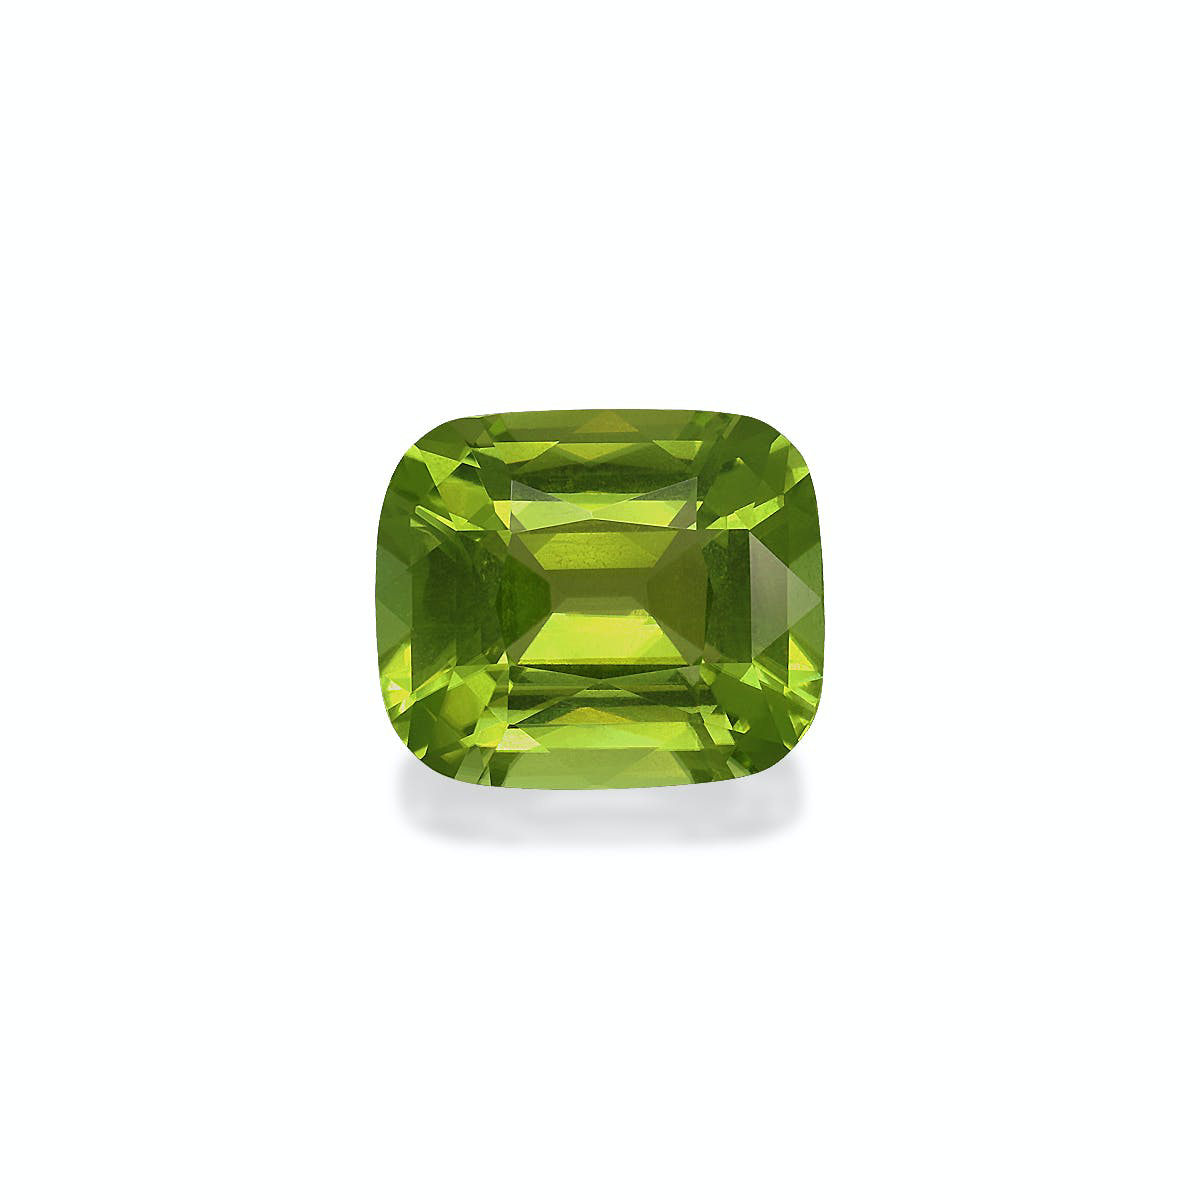 Picture of Pistachio Green Peridot 5.68ct - 12x10mm (PD0047)